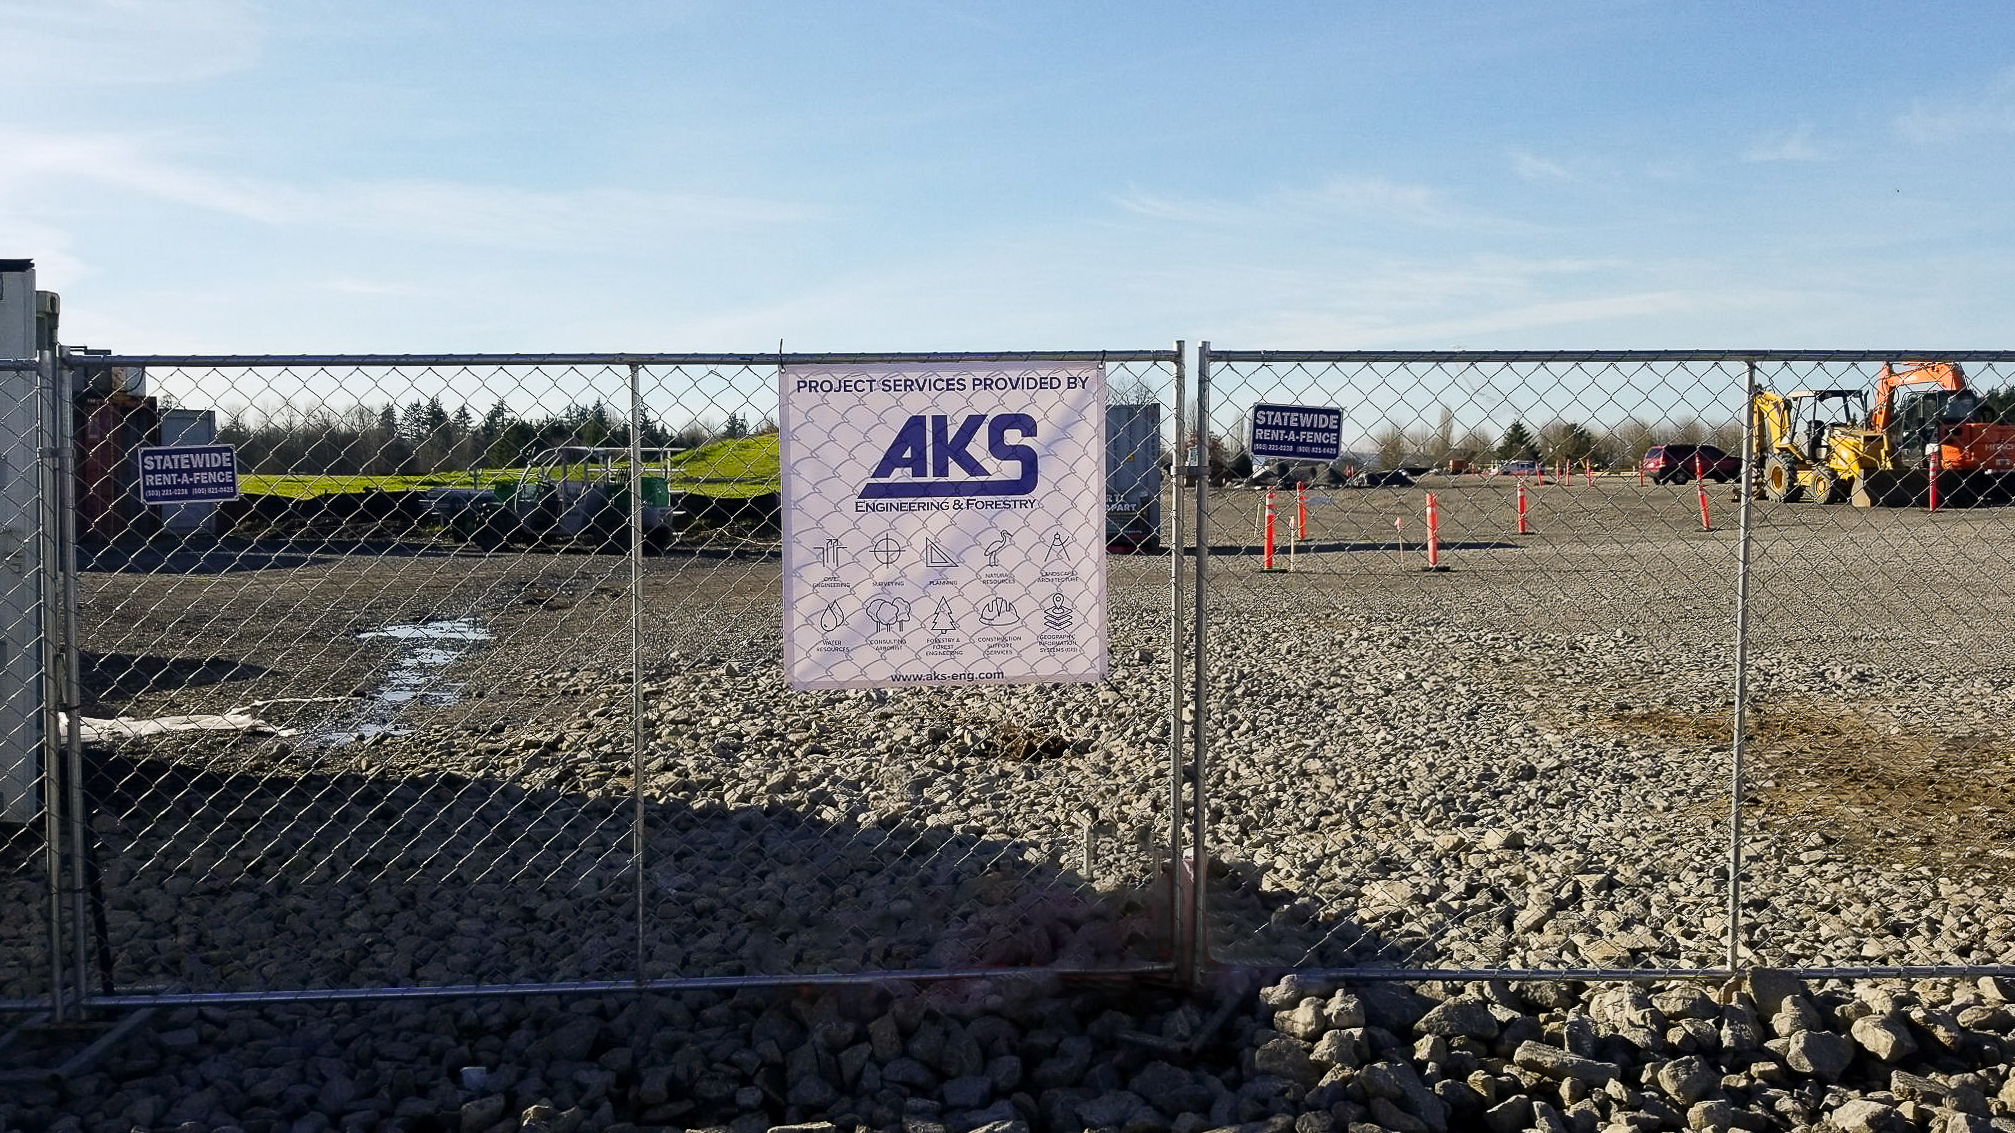 An AKS sign on a chain-link fence at a job site